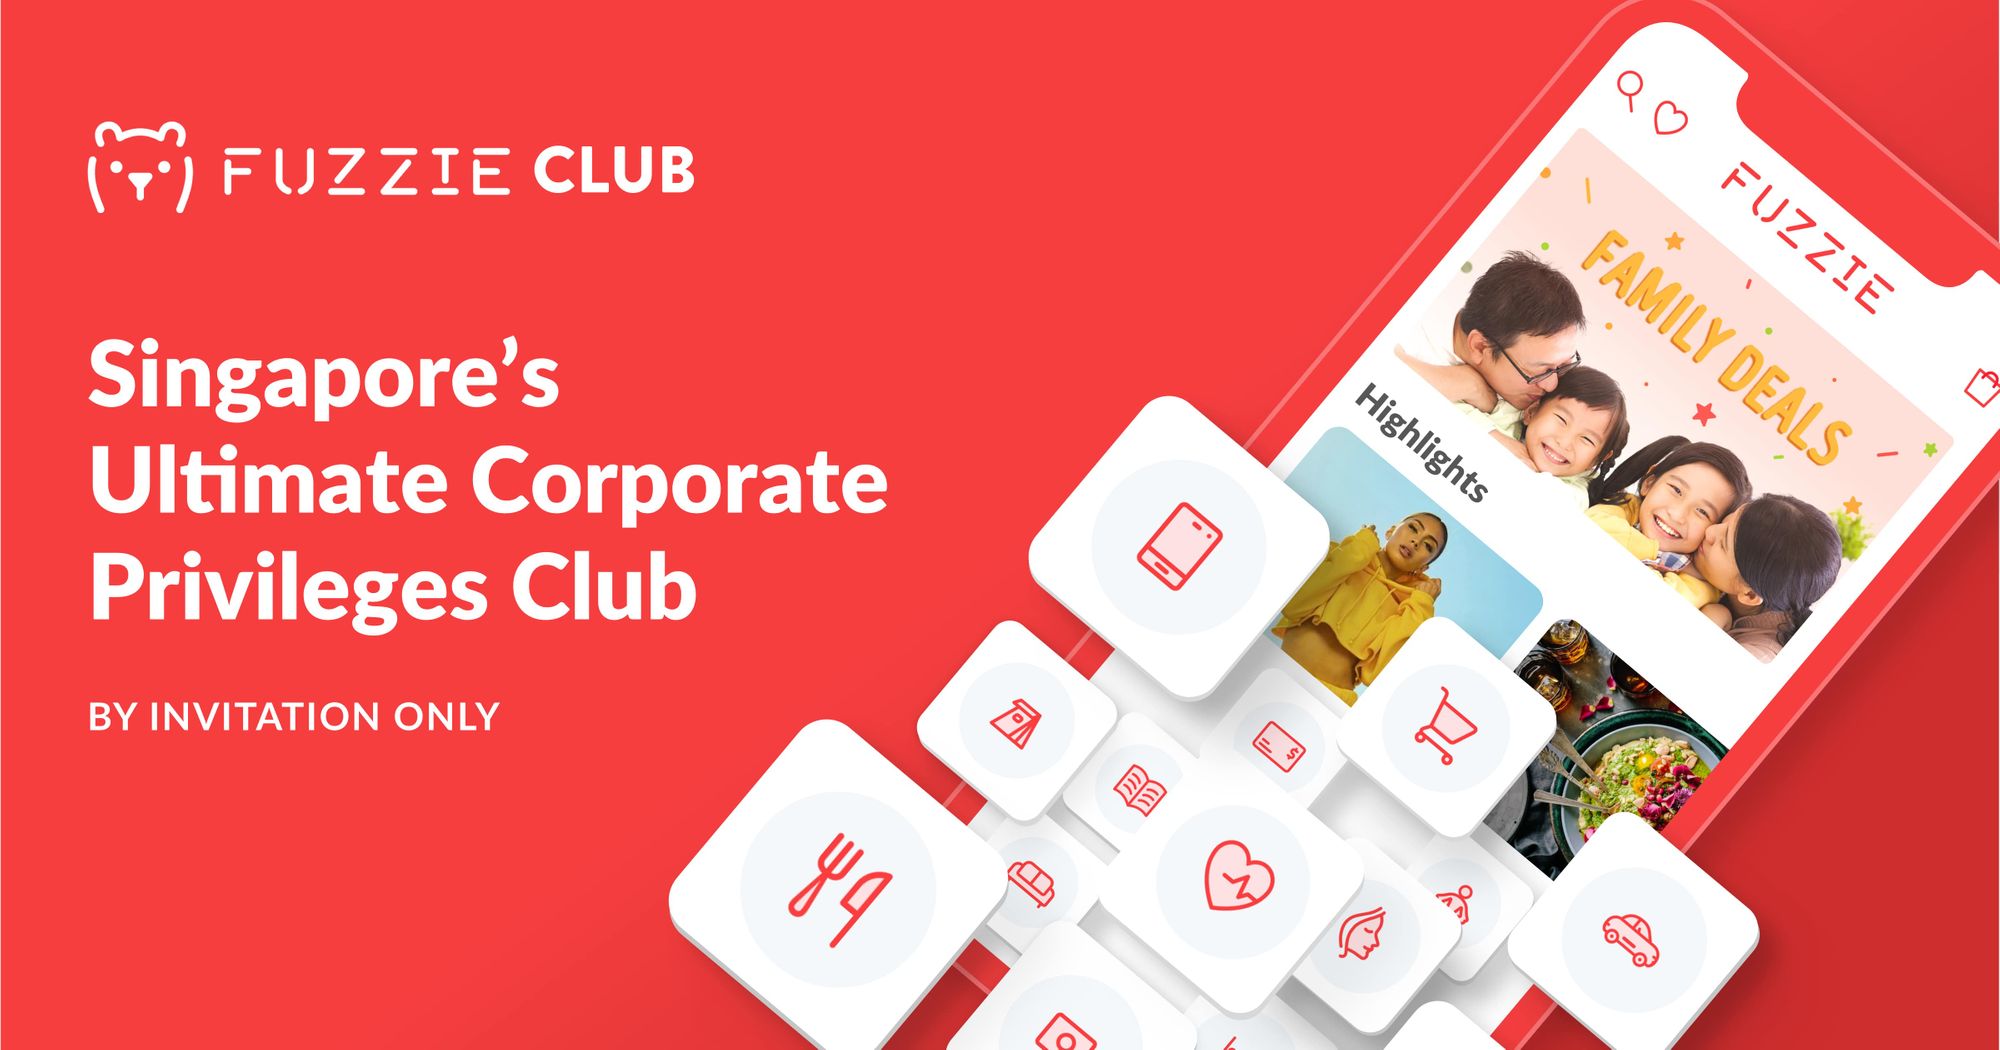 How to get your Fuzzie Corporate Club membership with your promo code